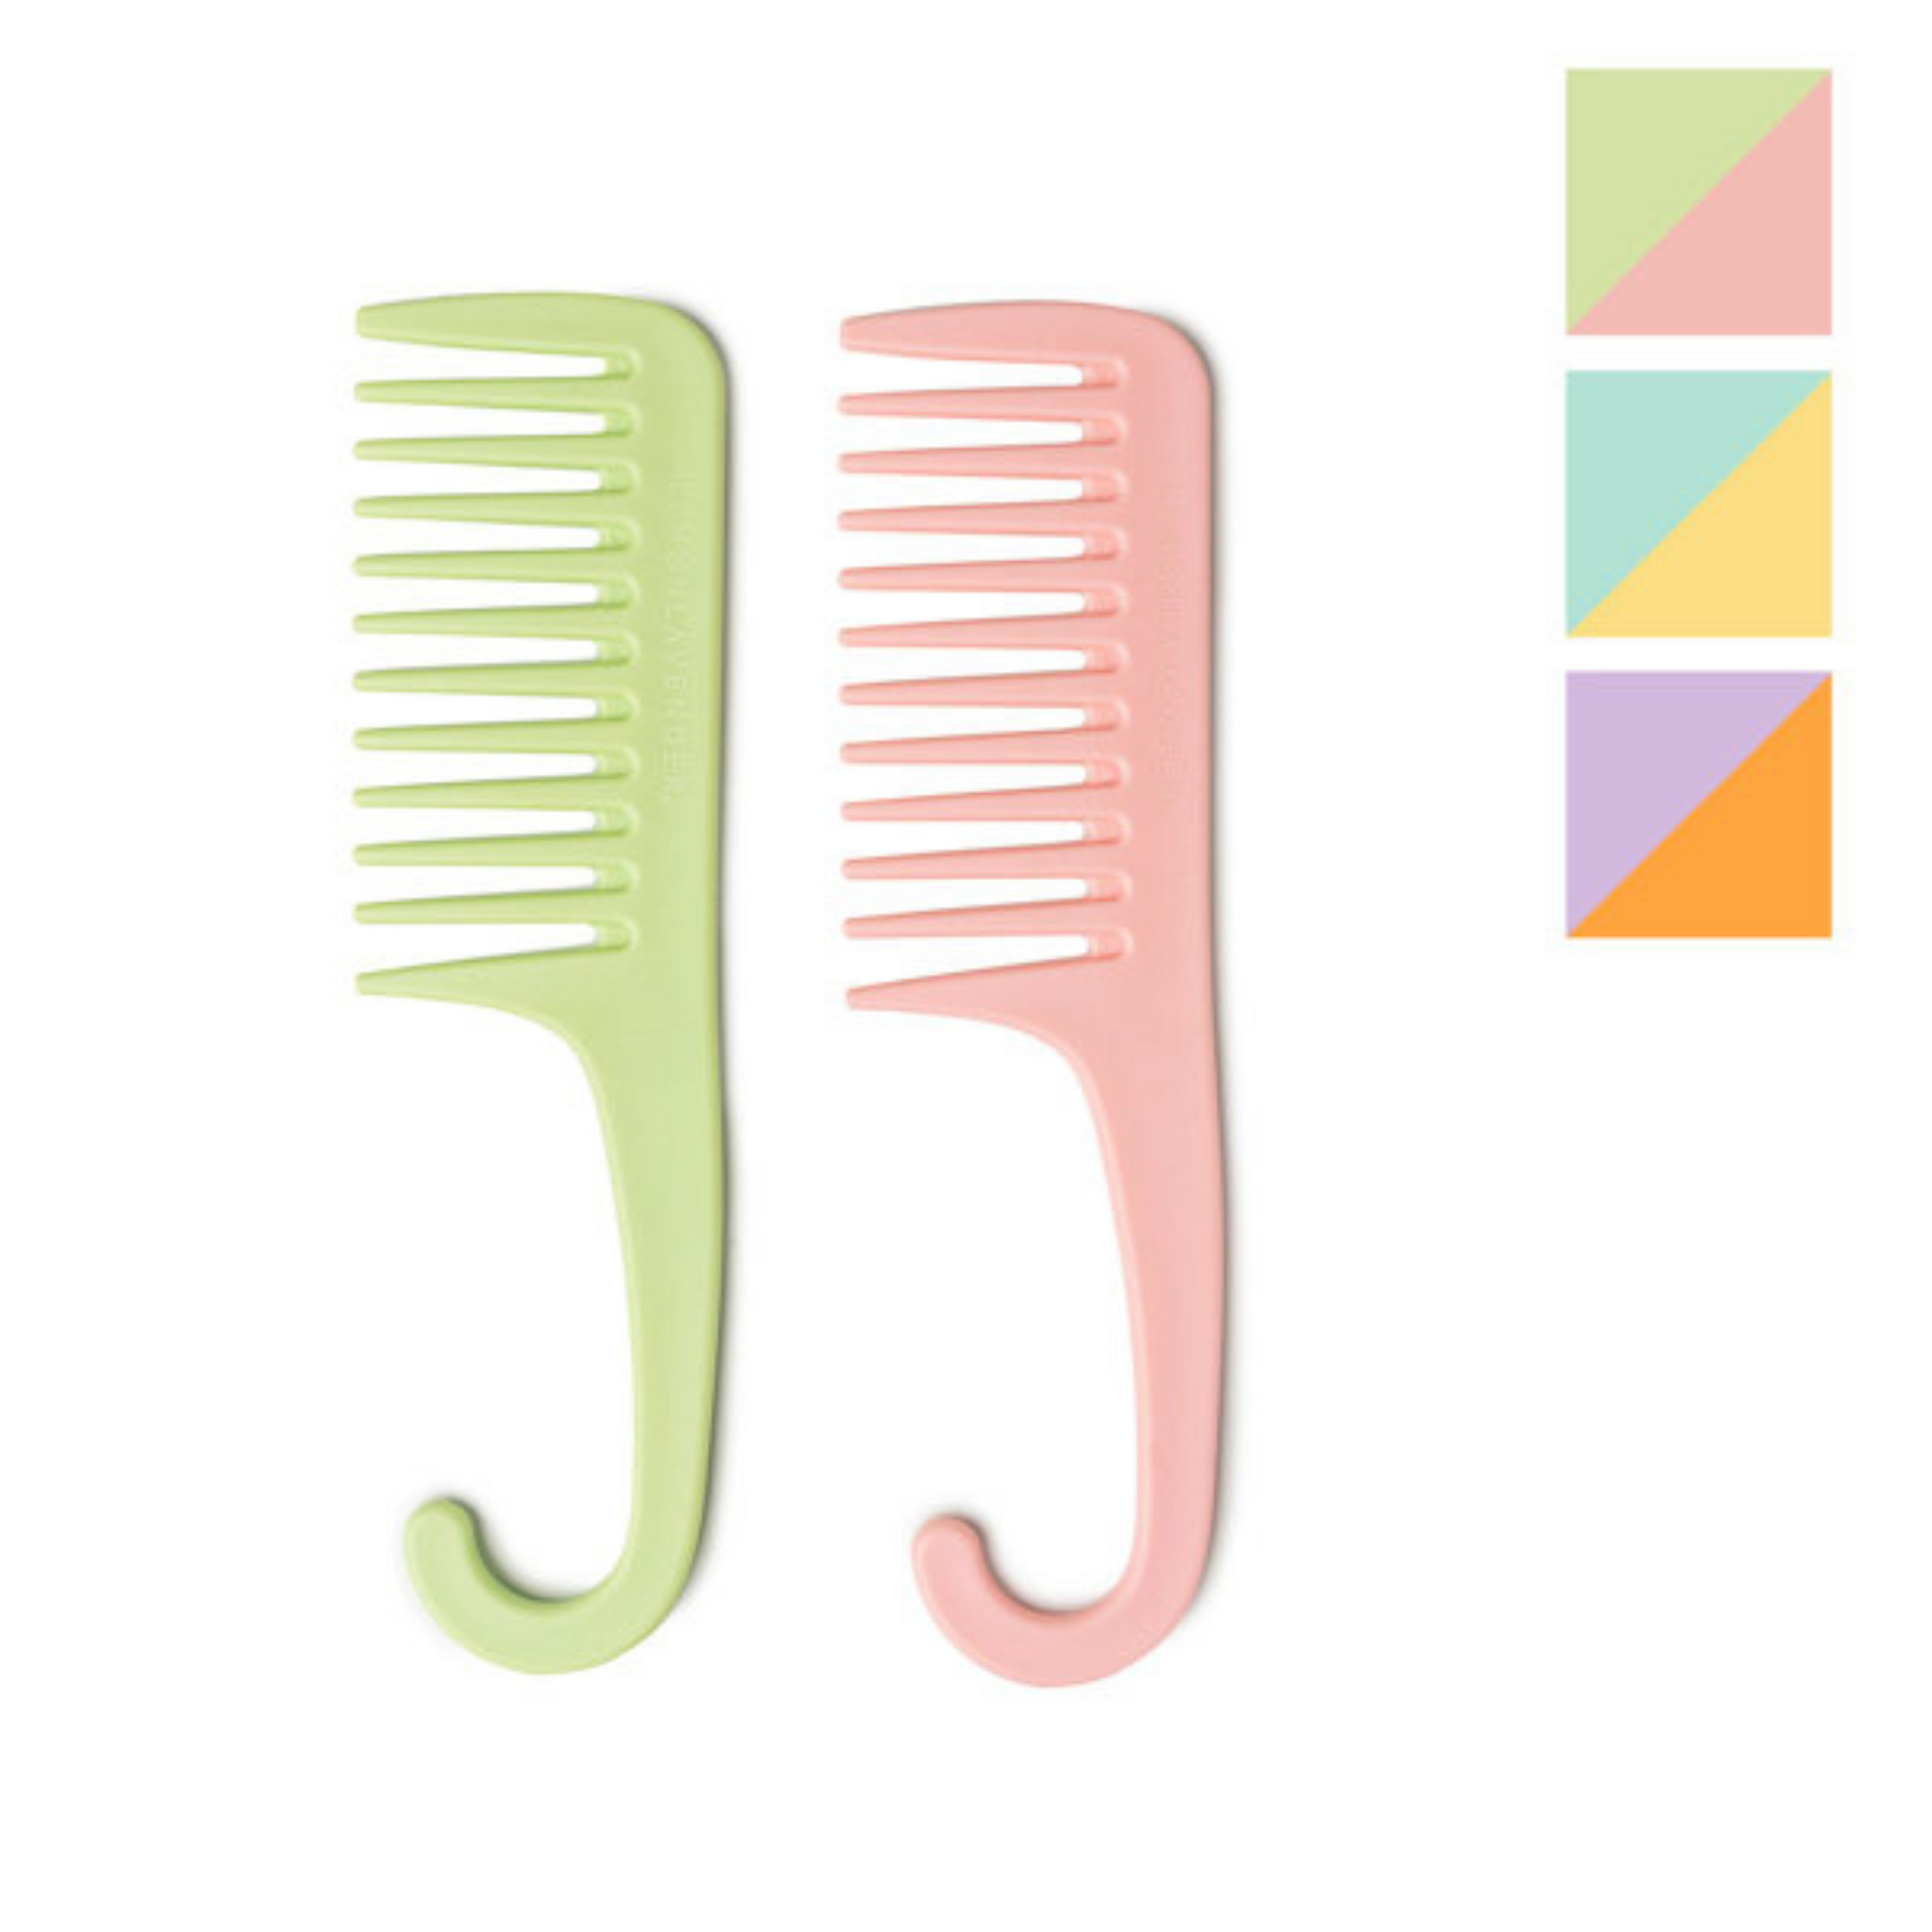 Our Knot Today Detangling Shower Comb is perfect for textured hair. With two combs per pack and wide teeth for gentle detangling, you won’t have to worry about breakage or split ends. Our combs evenly distribute conditioners, hair masks and prewashes, and feature hangable handles for easy storage. Get the perfect healthy look with Knot Today!